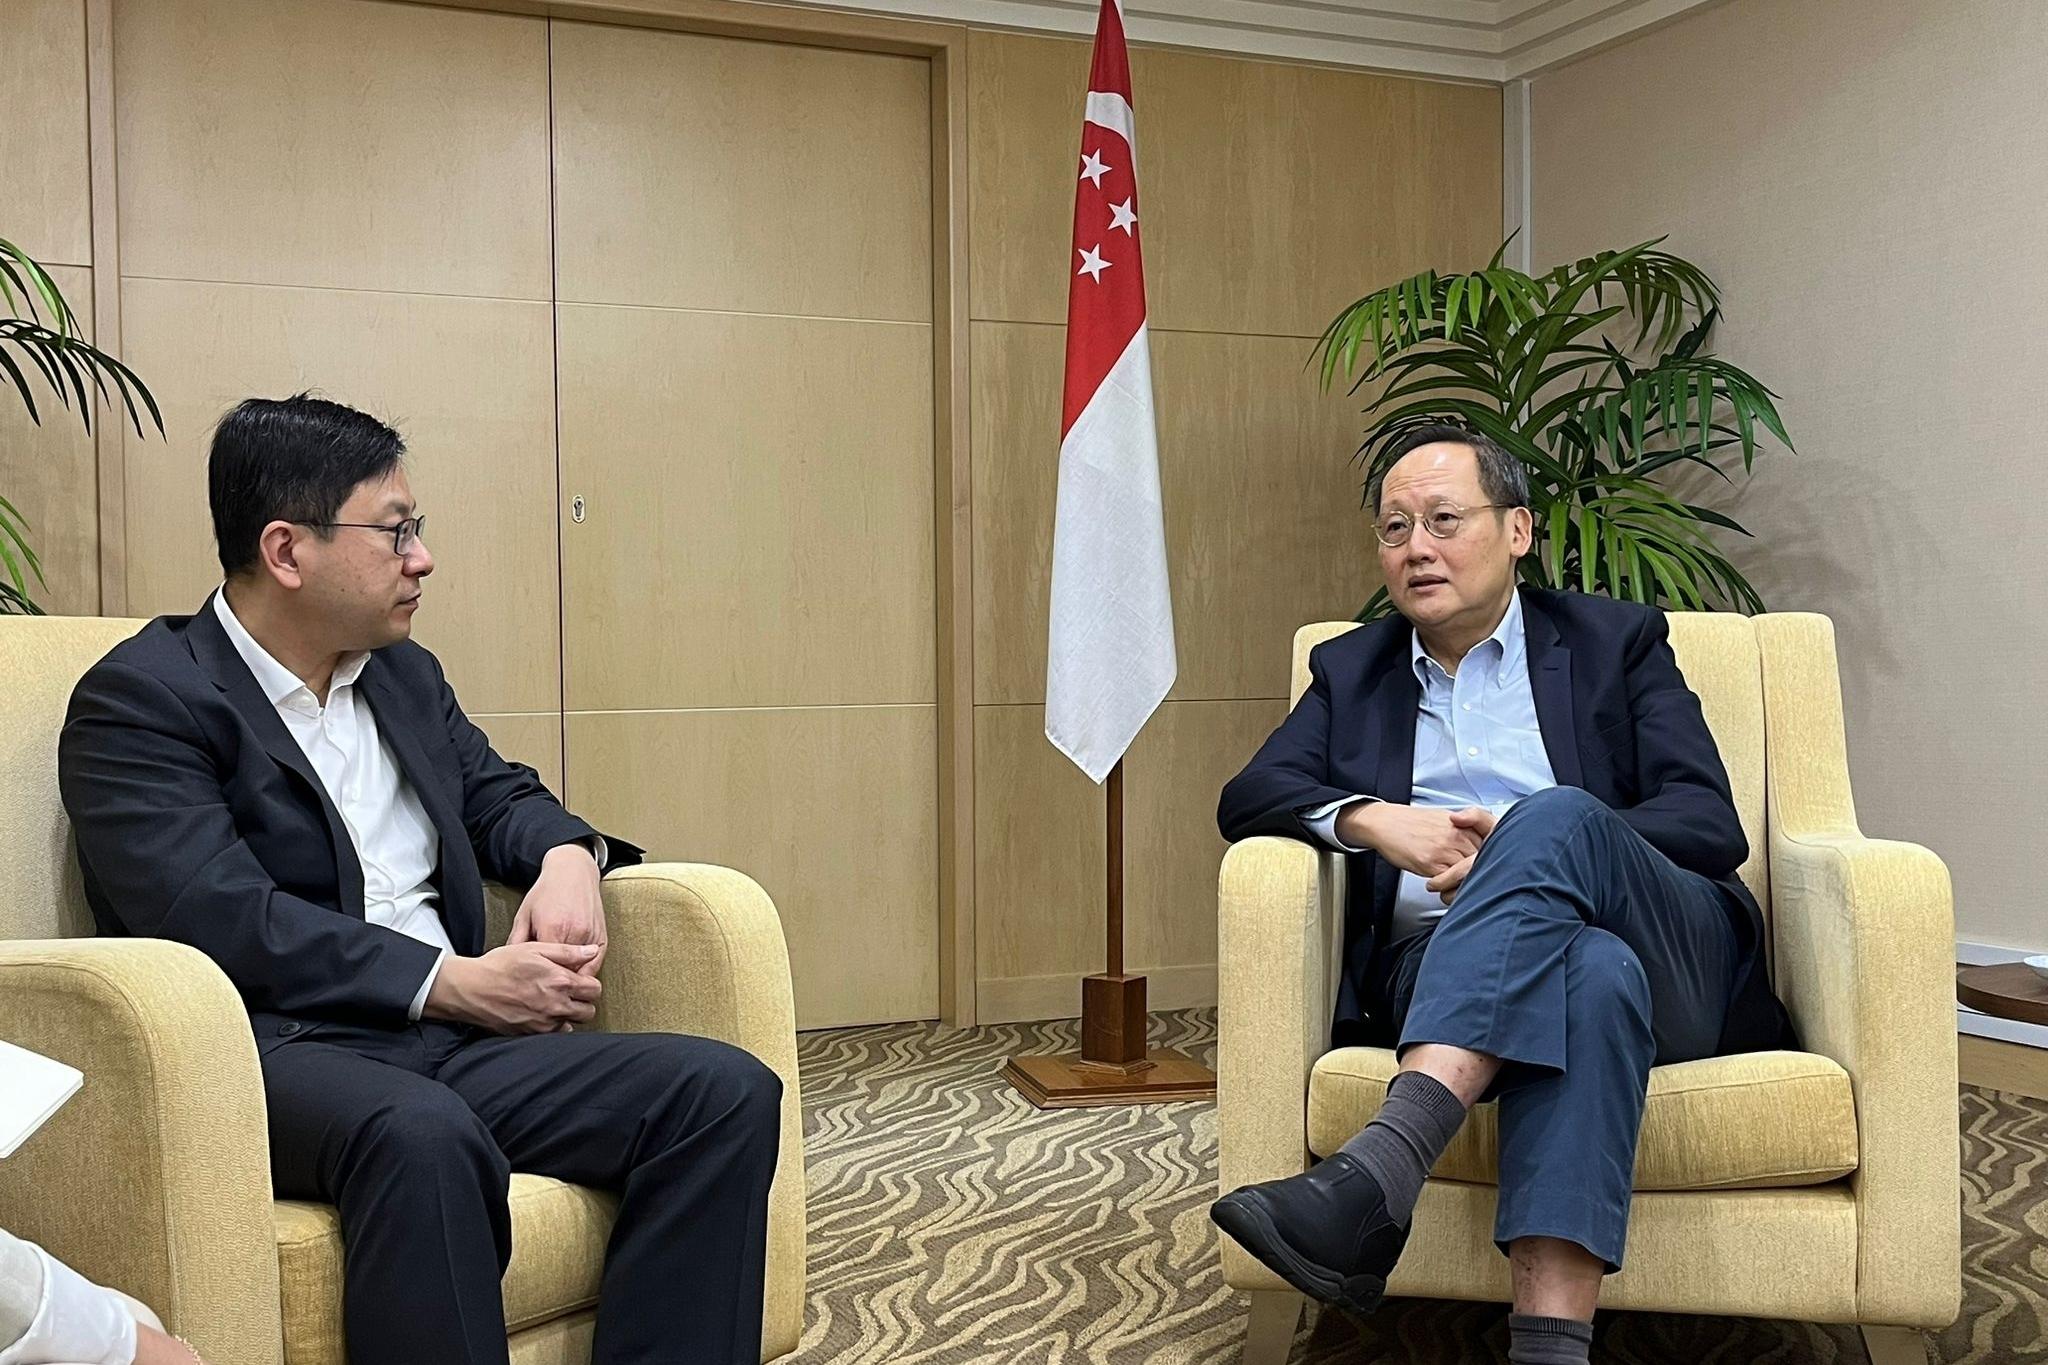 The Secretary for Labour and Welfare, Mr Chris Sun (left), called on the Minister for Manpower of Singapore, Dr Tan See Leng (right), yesterday morning (January 6) during his visit to Singapore. They exchanged views on attracting talents amid the dual challenge of ageing population and shrinking labour force of the two places as exacerbated by the COVID-19 pandemic. They also discussed seizing the advantages of the role of Hong Kong and Singapore as part of the Guangdong-Hong Kong-Macao Greater Bay Area and the gateway to the Association of Southeast Asian Nations respectively, thereby boosting the attractiveness of Asia to talents around the world.